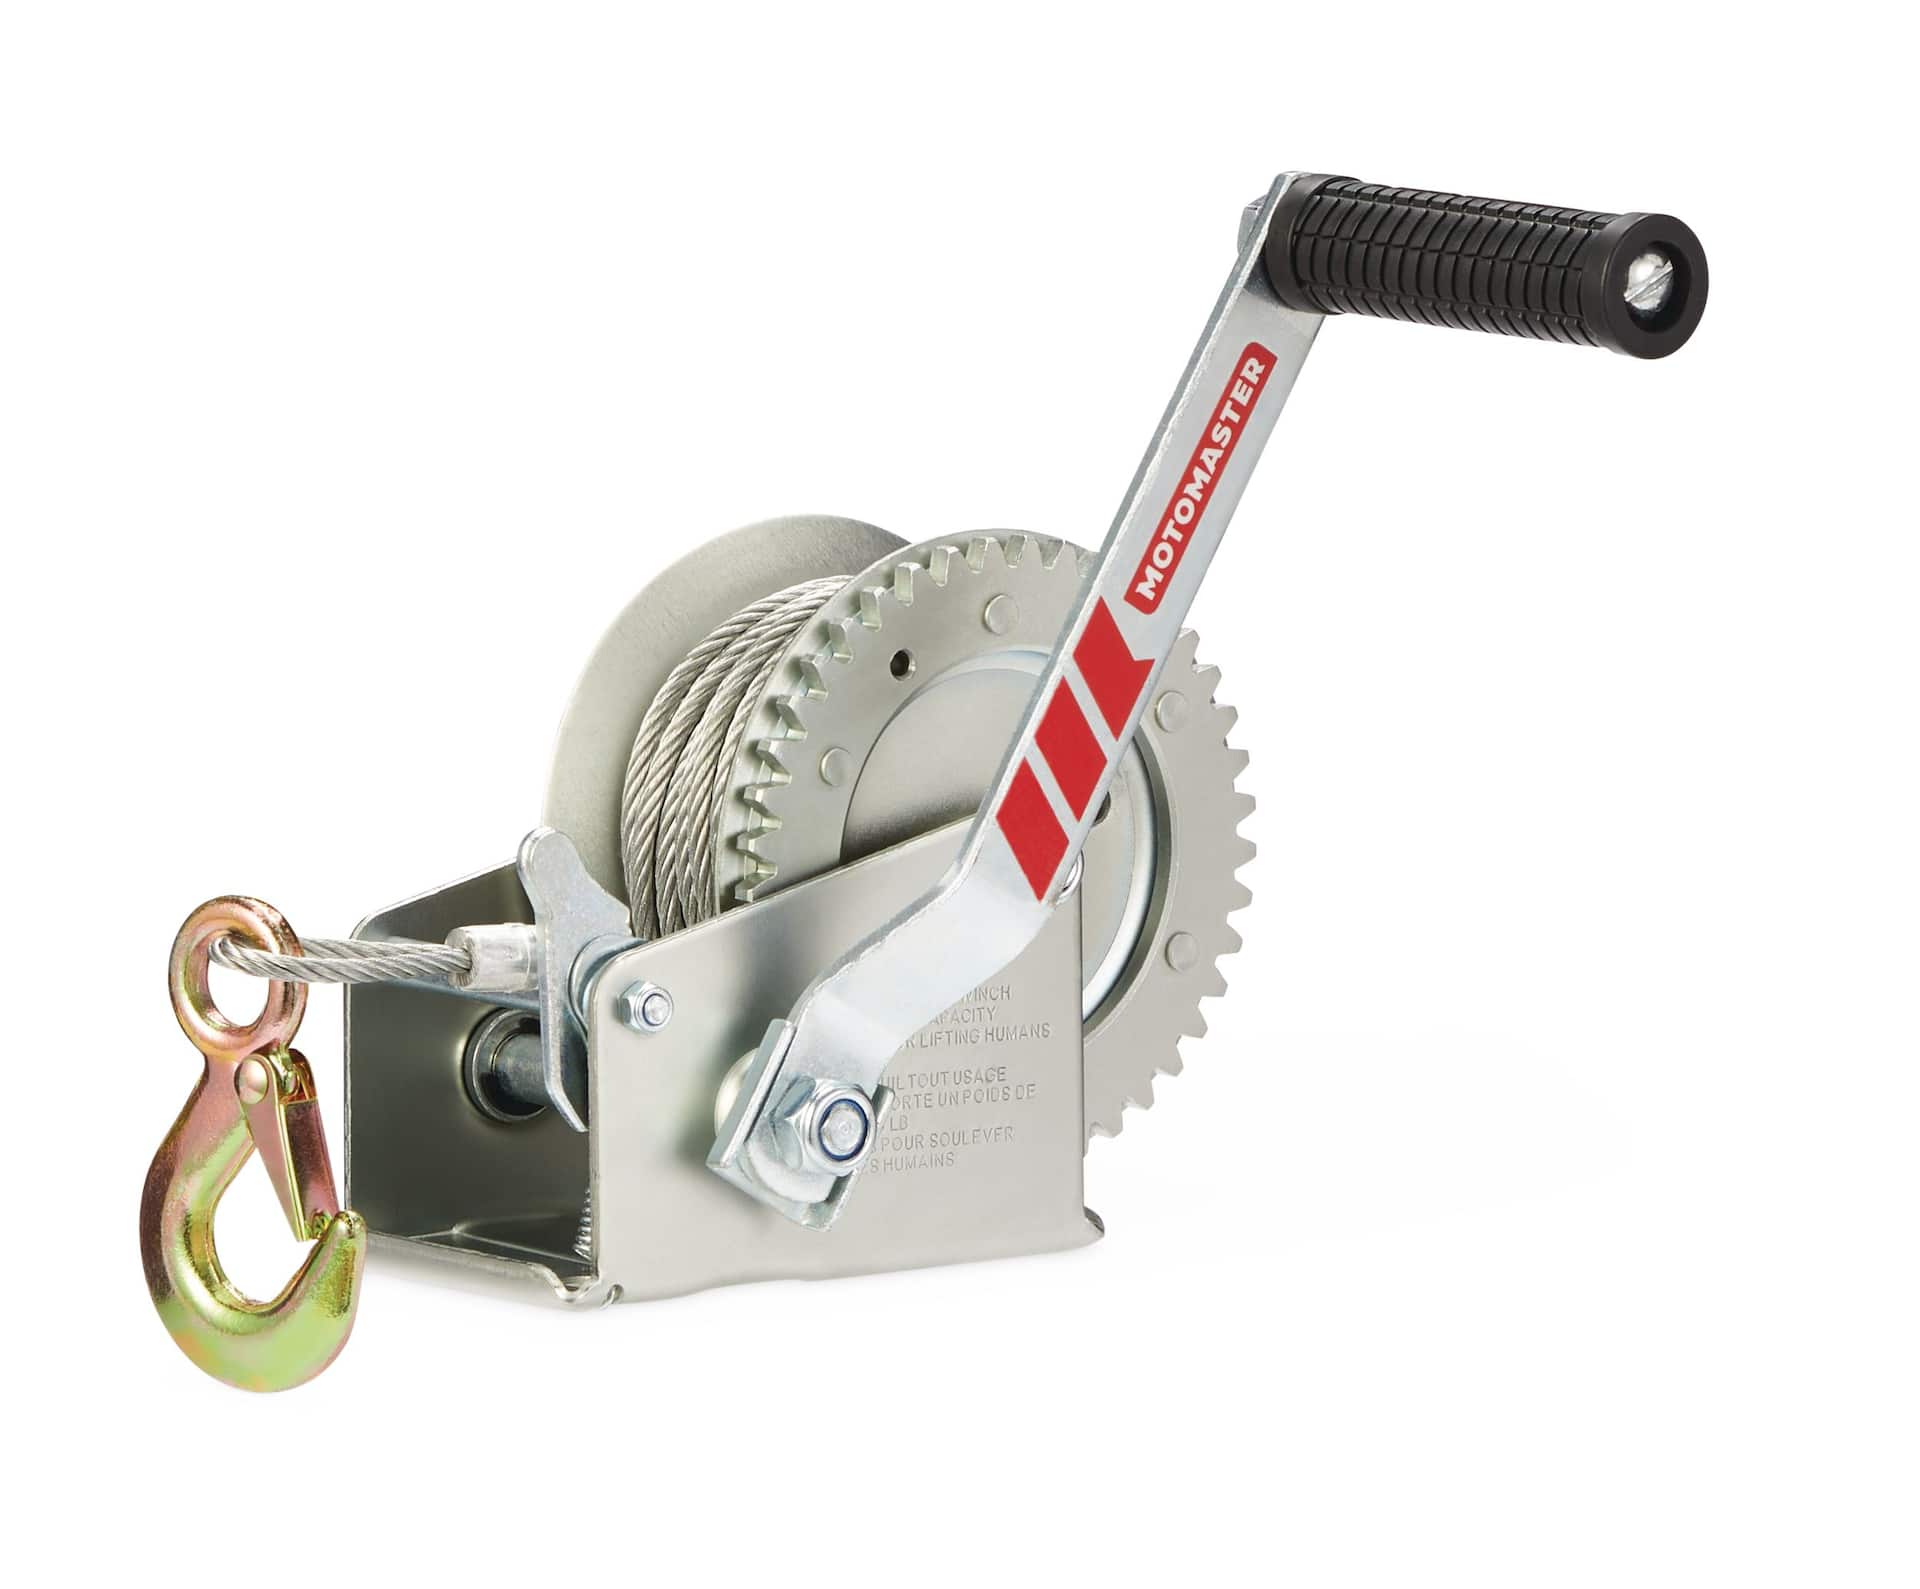 MotoMaster One-Speed Two-Way Trailer Winch, 1300-lb Capacity